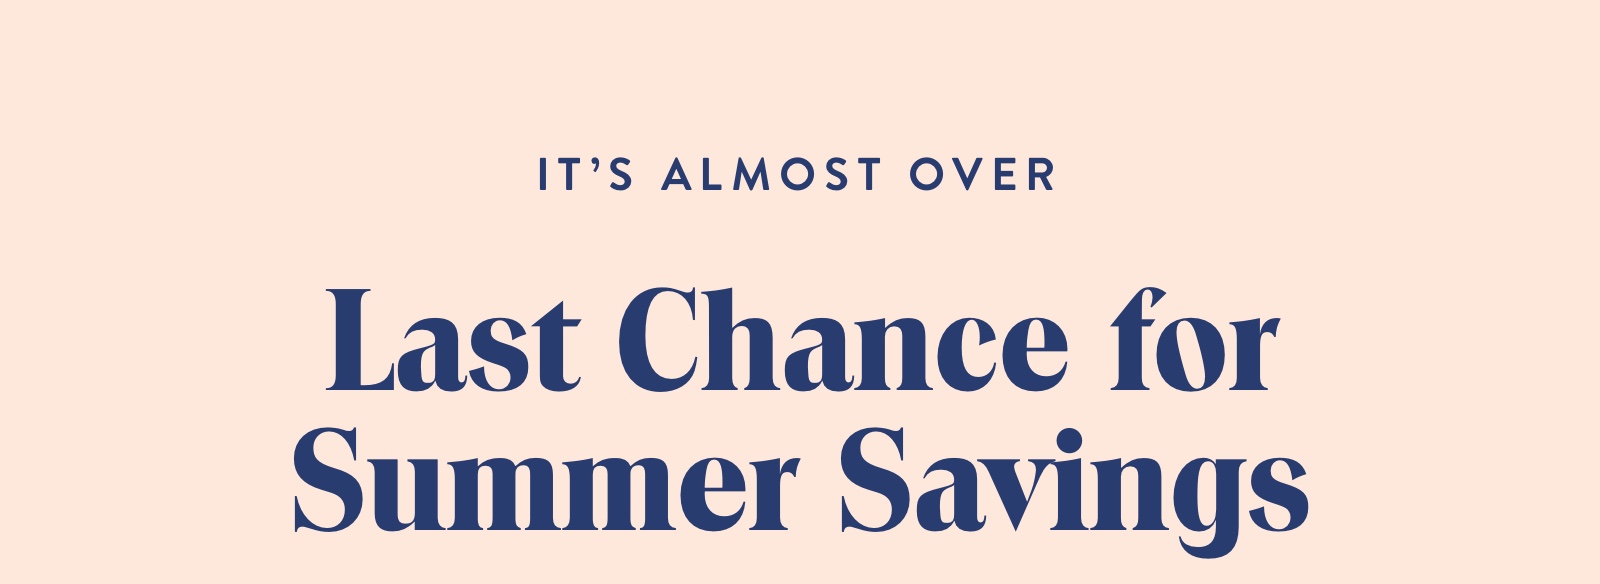 Our Summer Savings Event is Ending